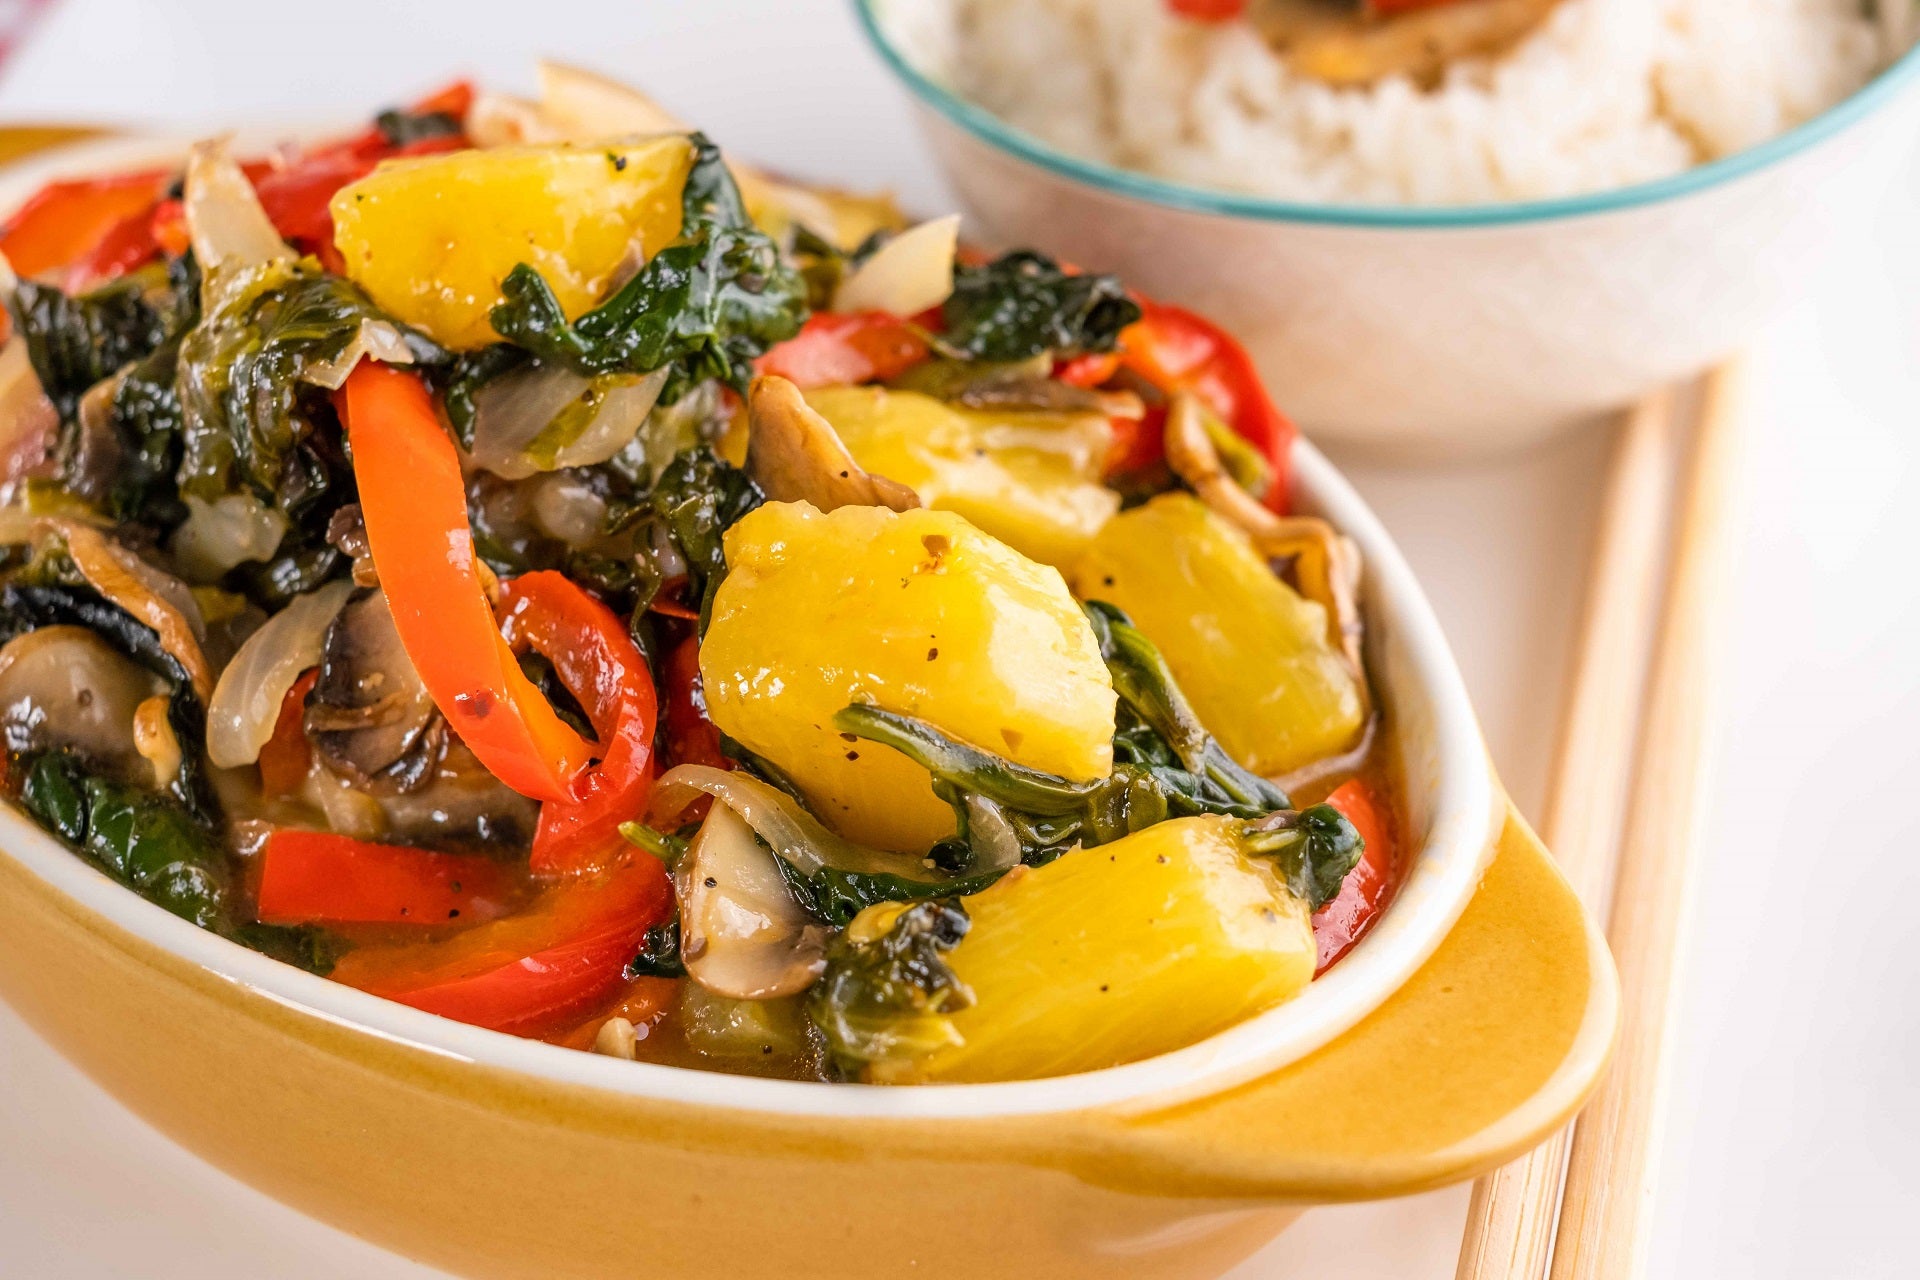 Vegetable Stir-fry with Pineapple